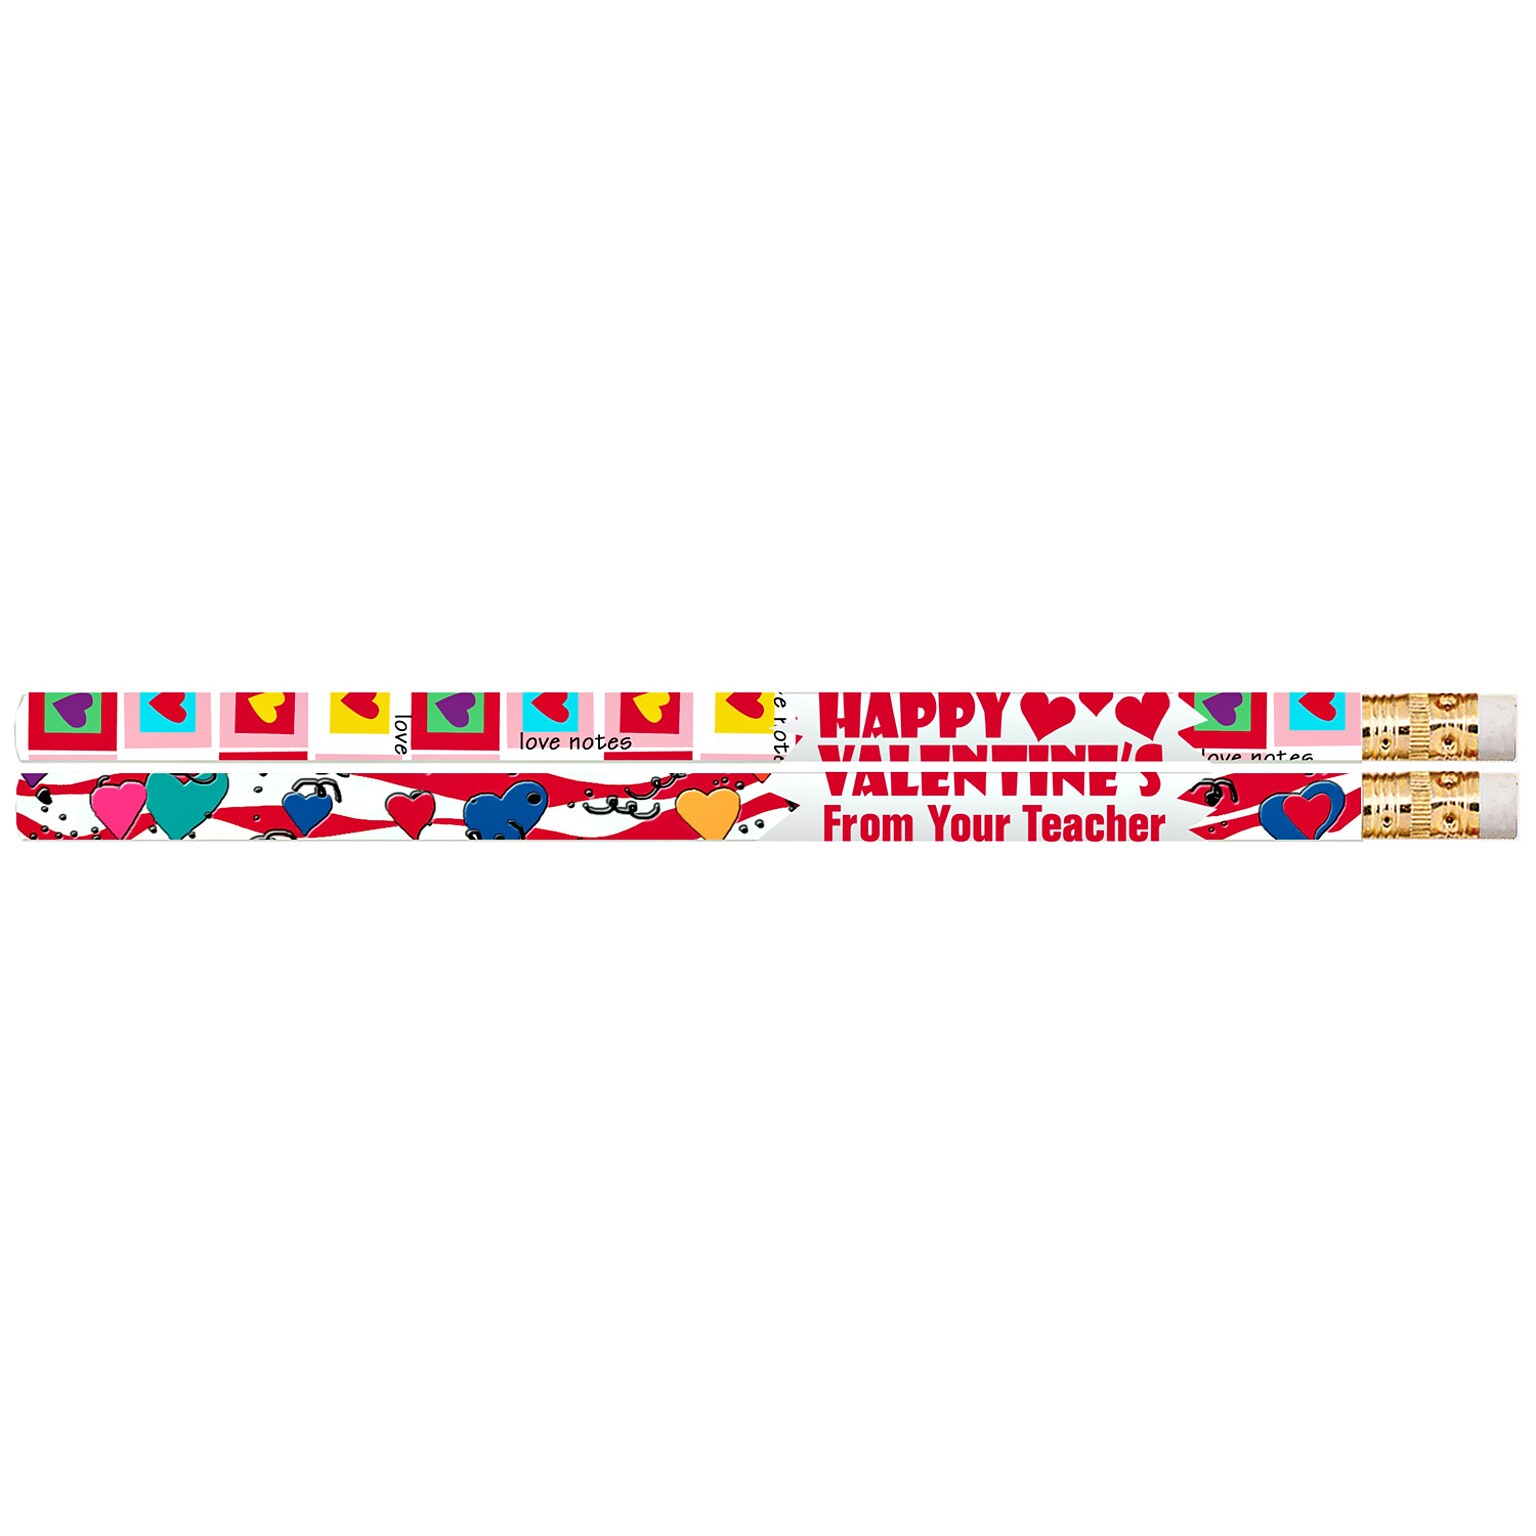 Musgrave Pencil Company Happy Valentines From Your Teacher Motivational Pencils, 12 Per Pack, 12 Packs (MUS2518D-12)